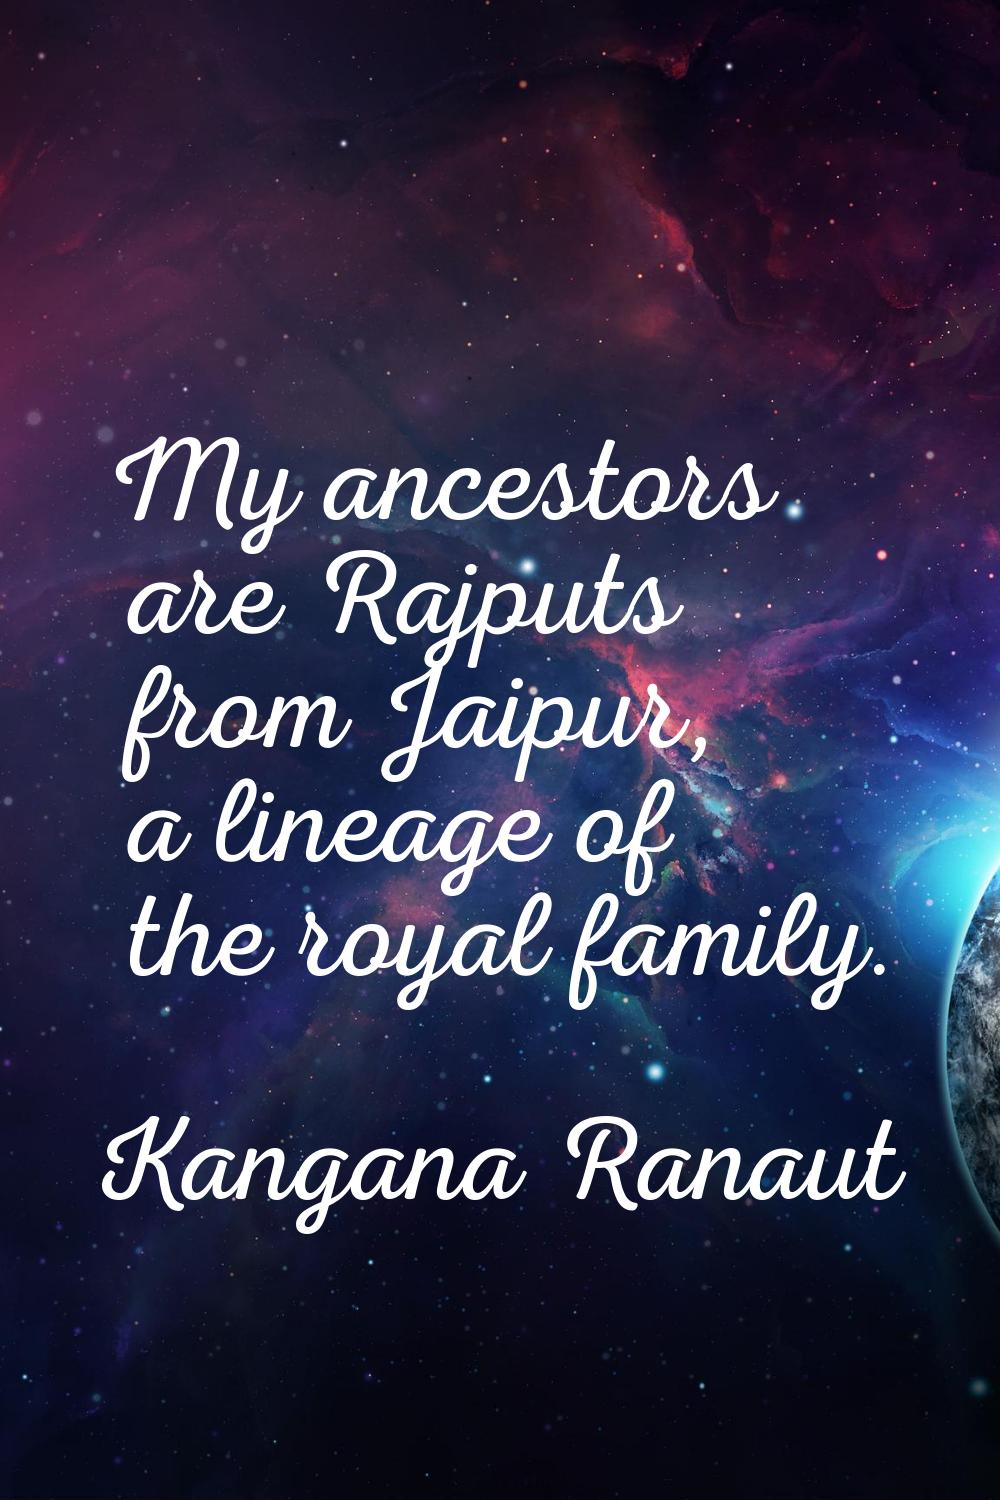 My ancestors are Rajputs from Jaipur, a lineage of the royal family.